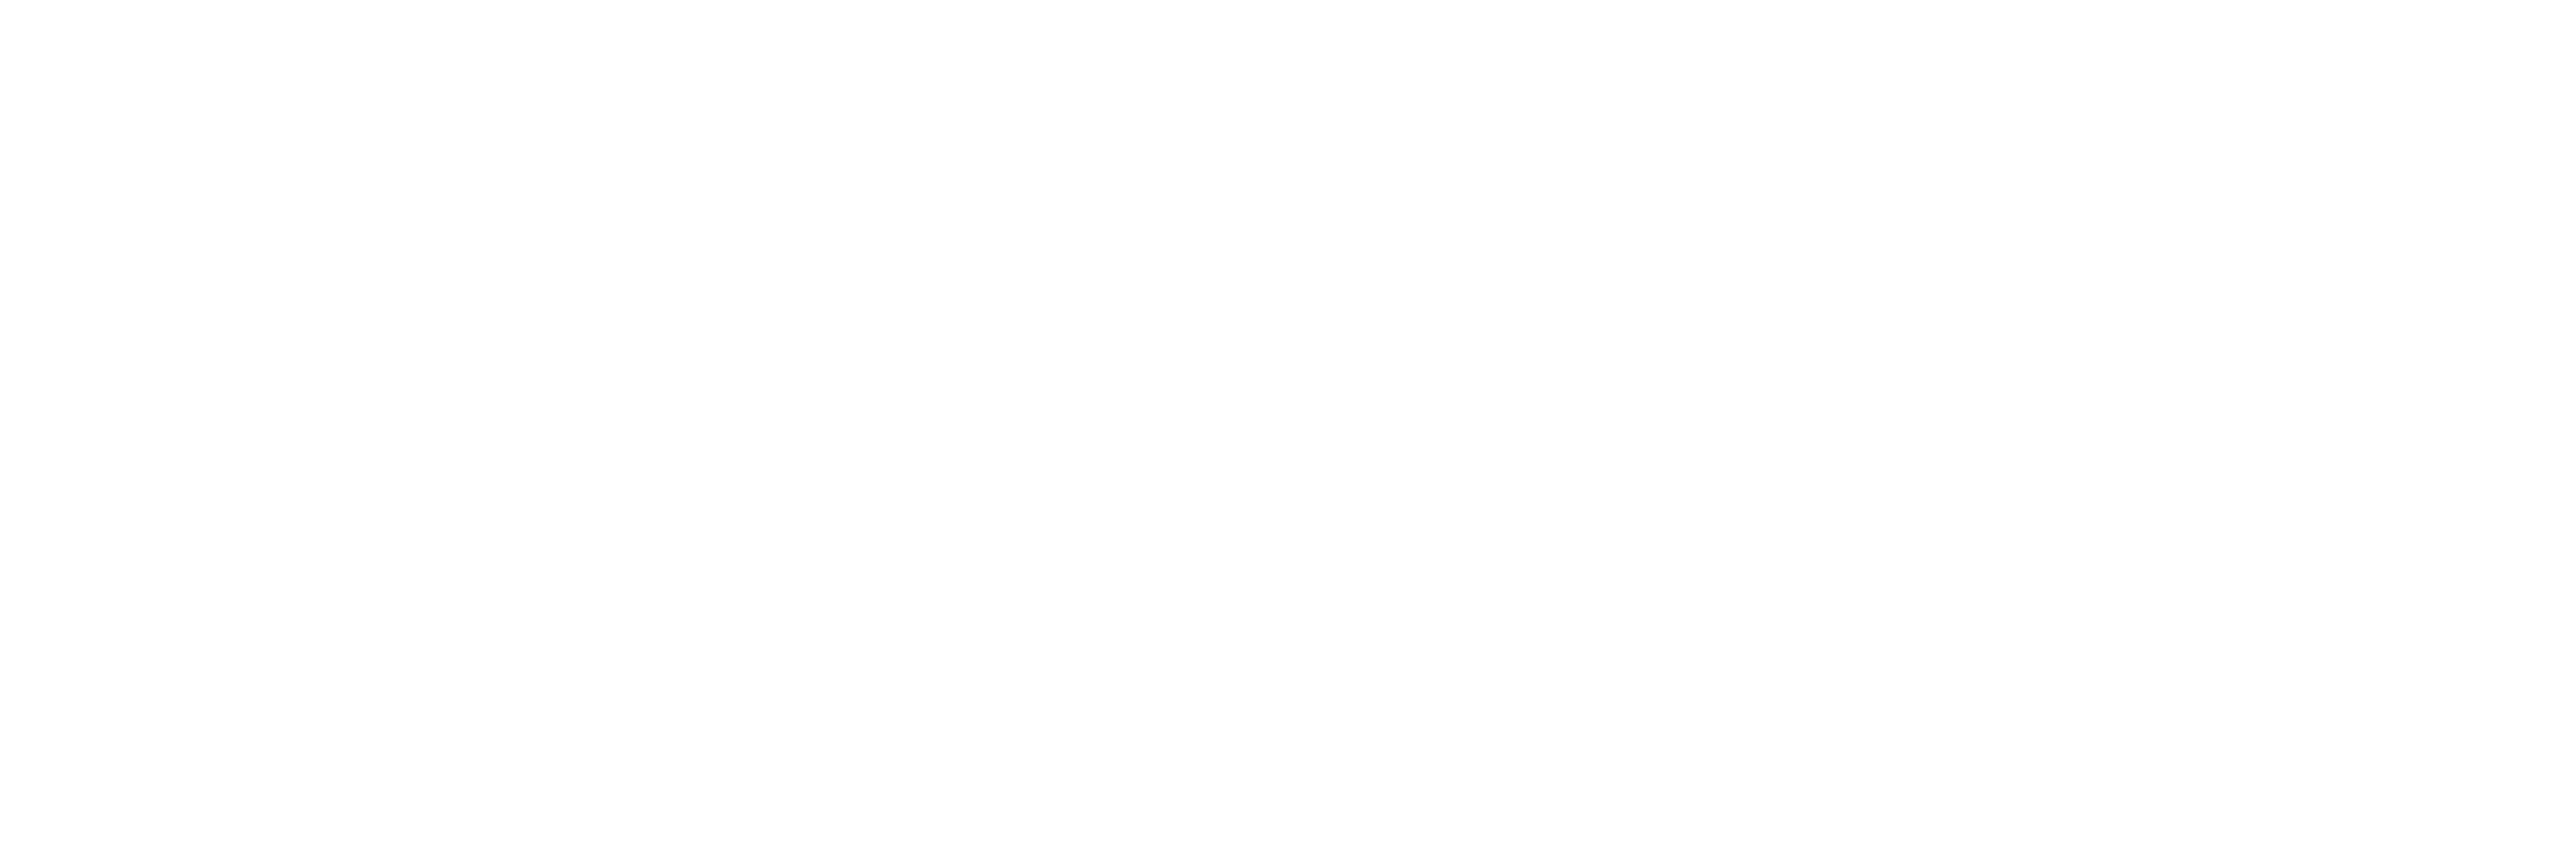 high society cleaners logo